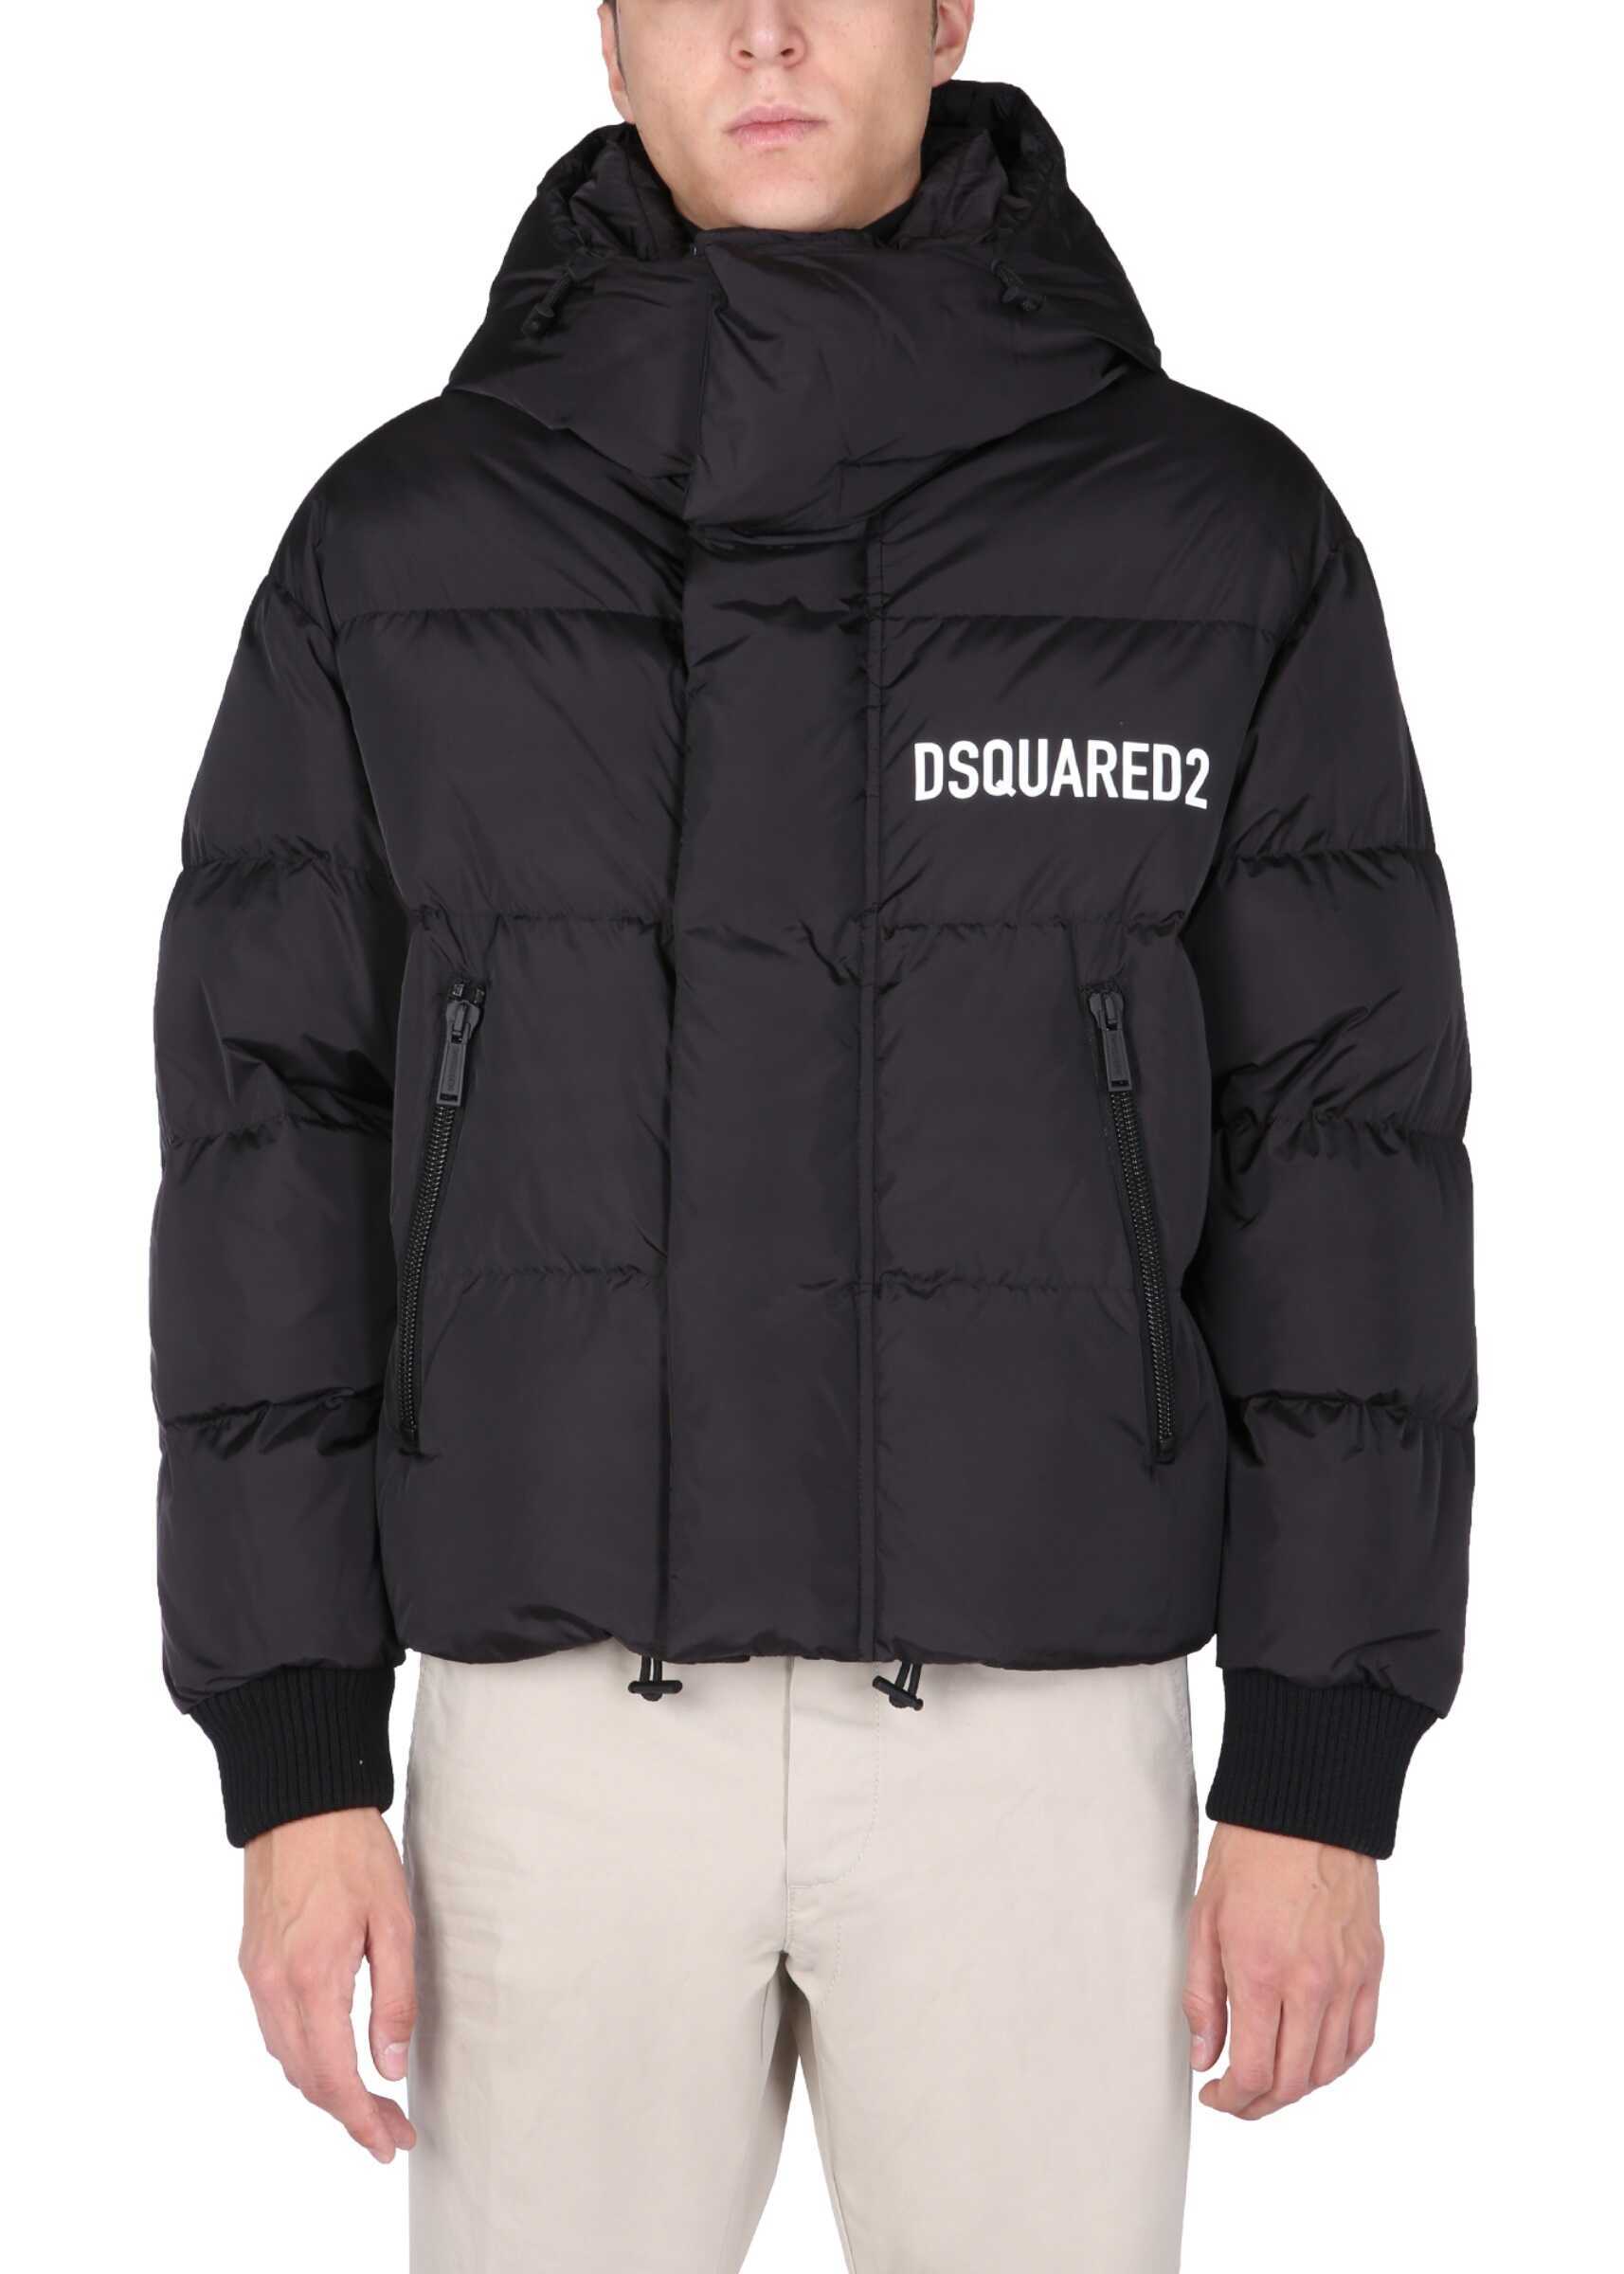 DSQUARED2 "Kenny" Down Jacket S71AN0301_S53817965 BLACK